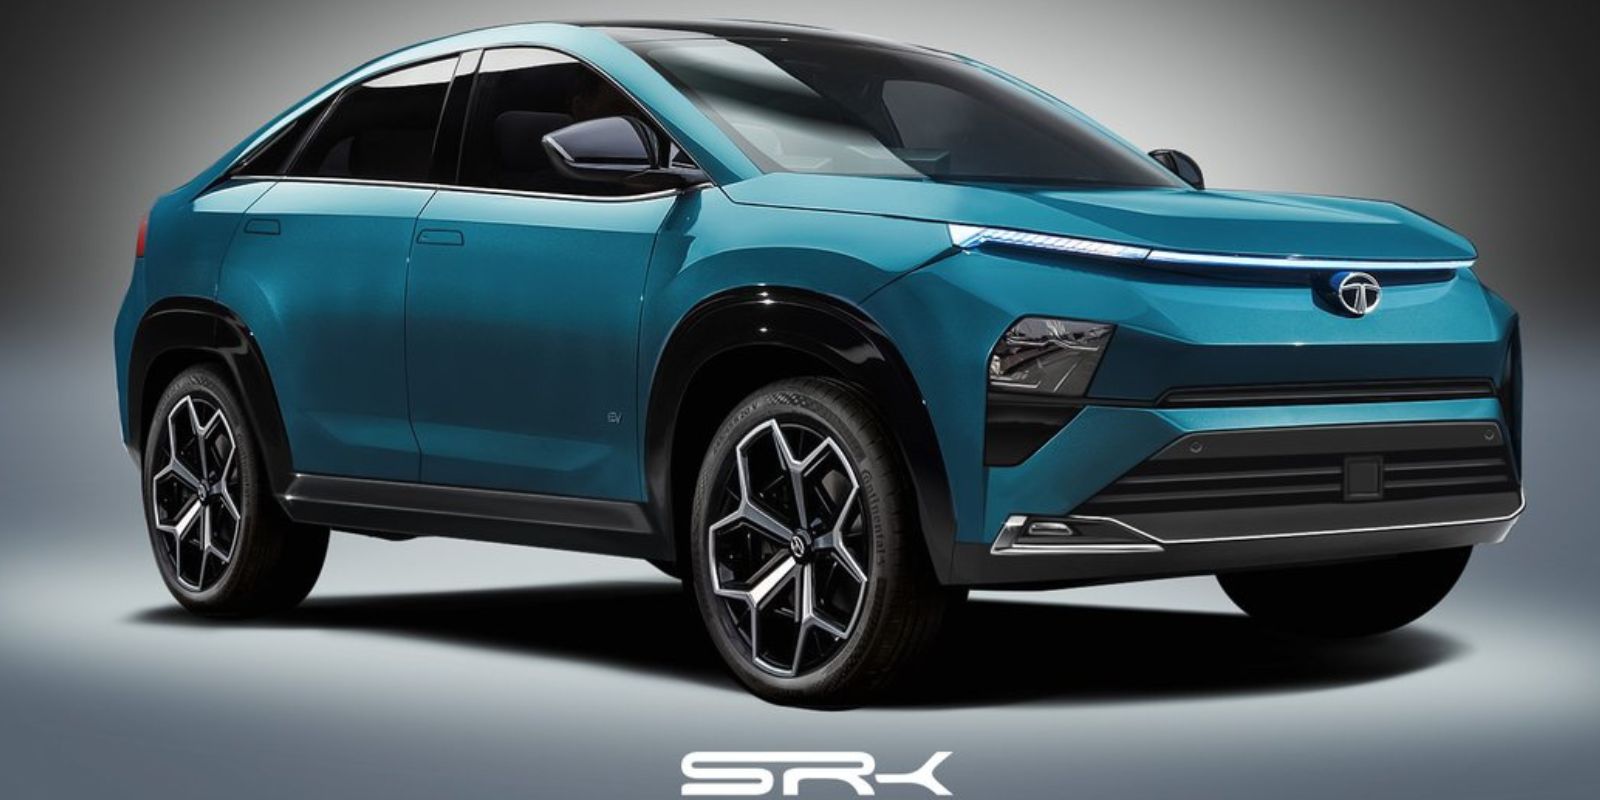 ProductionSpec Tata Curvv Electric SUV Coupe Rendered